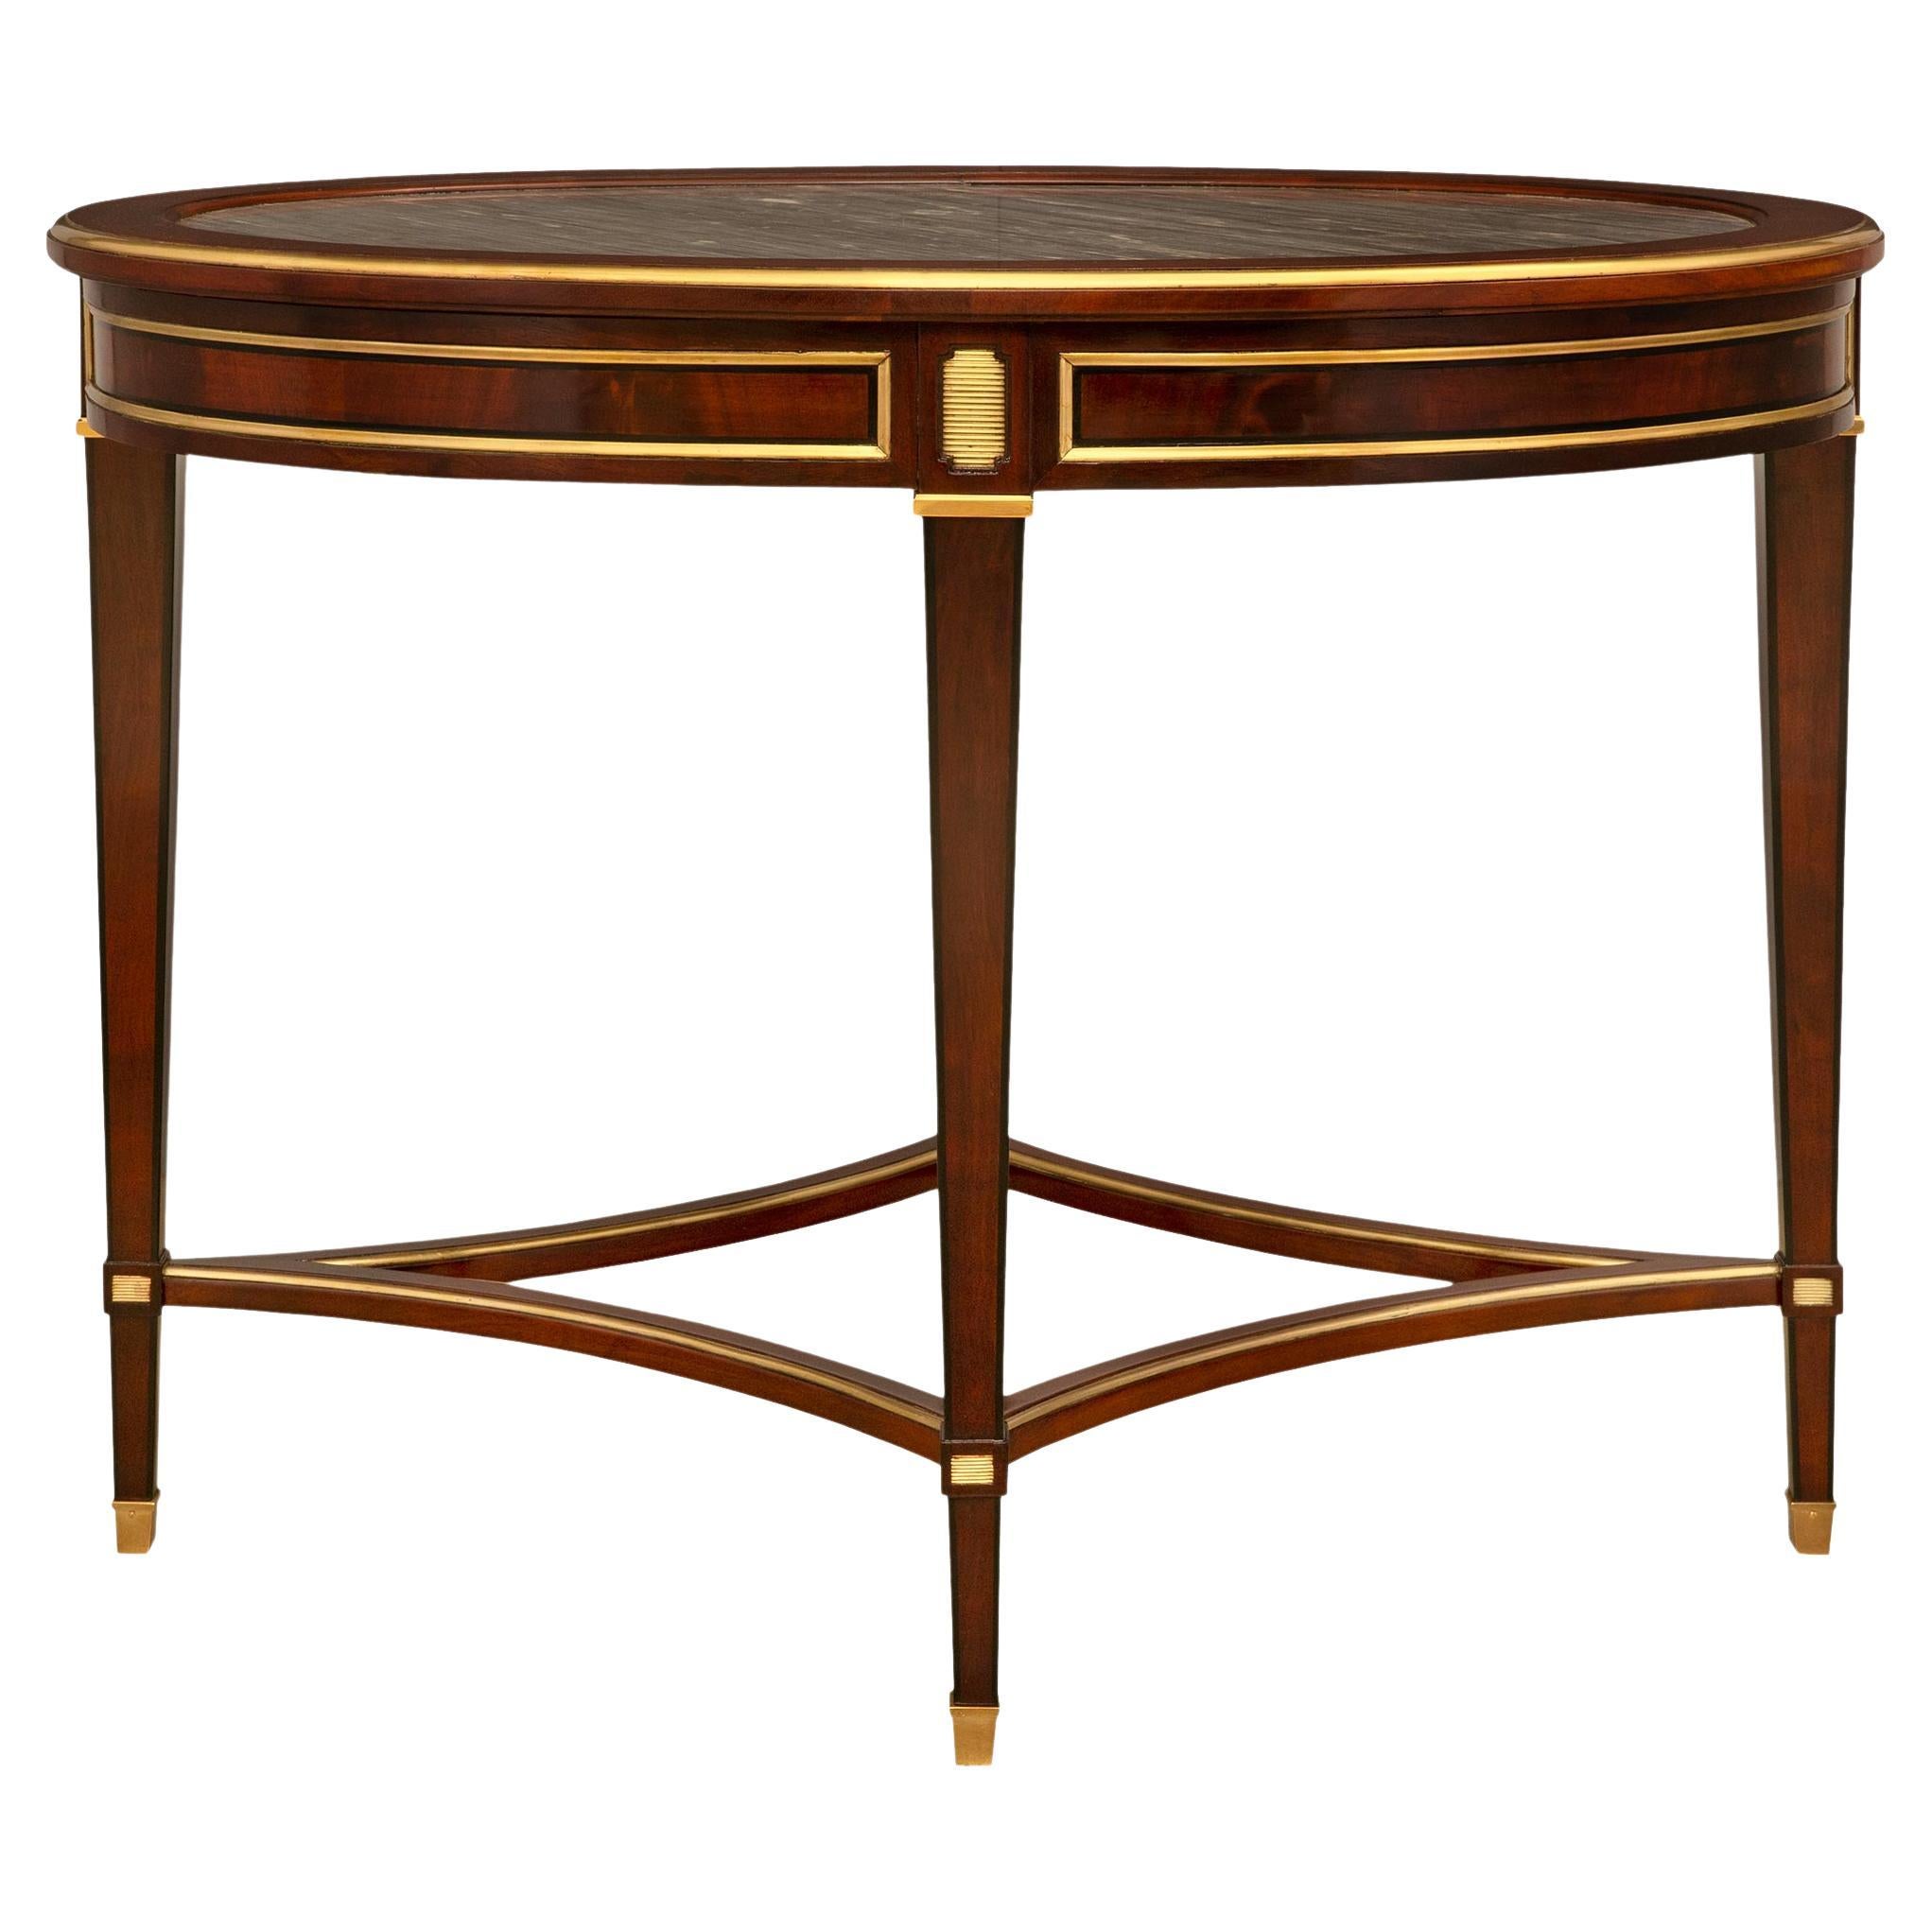 A continental 19th century Directoire st. mahogany center table